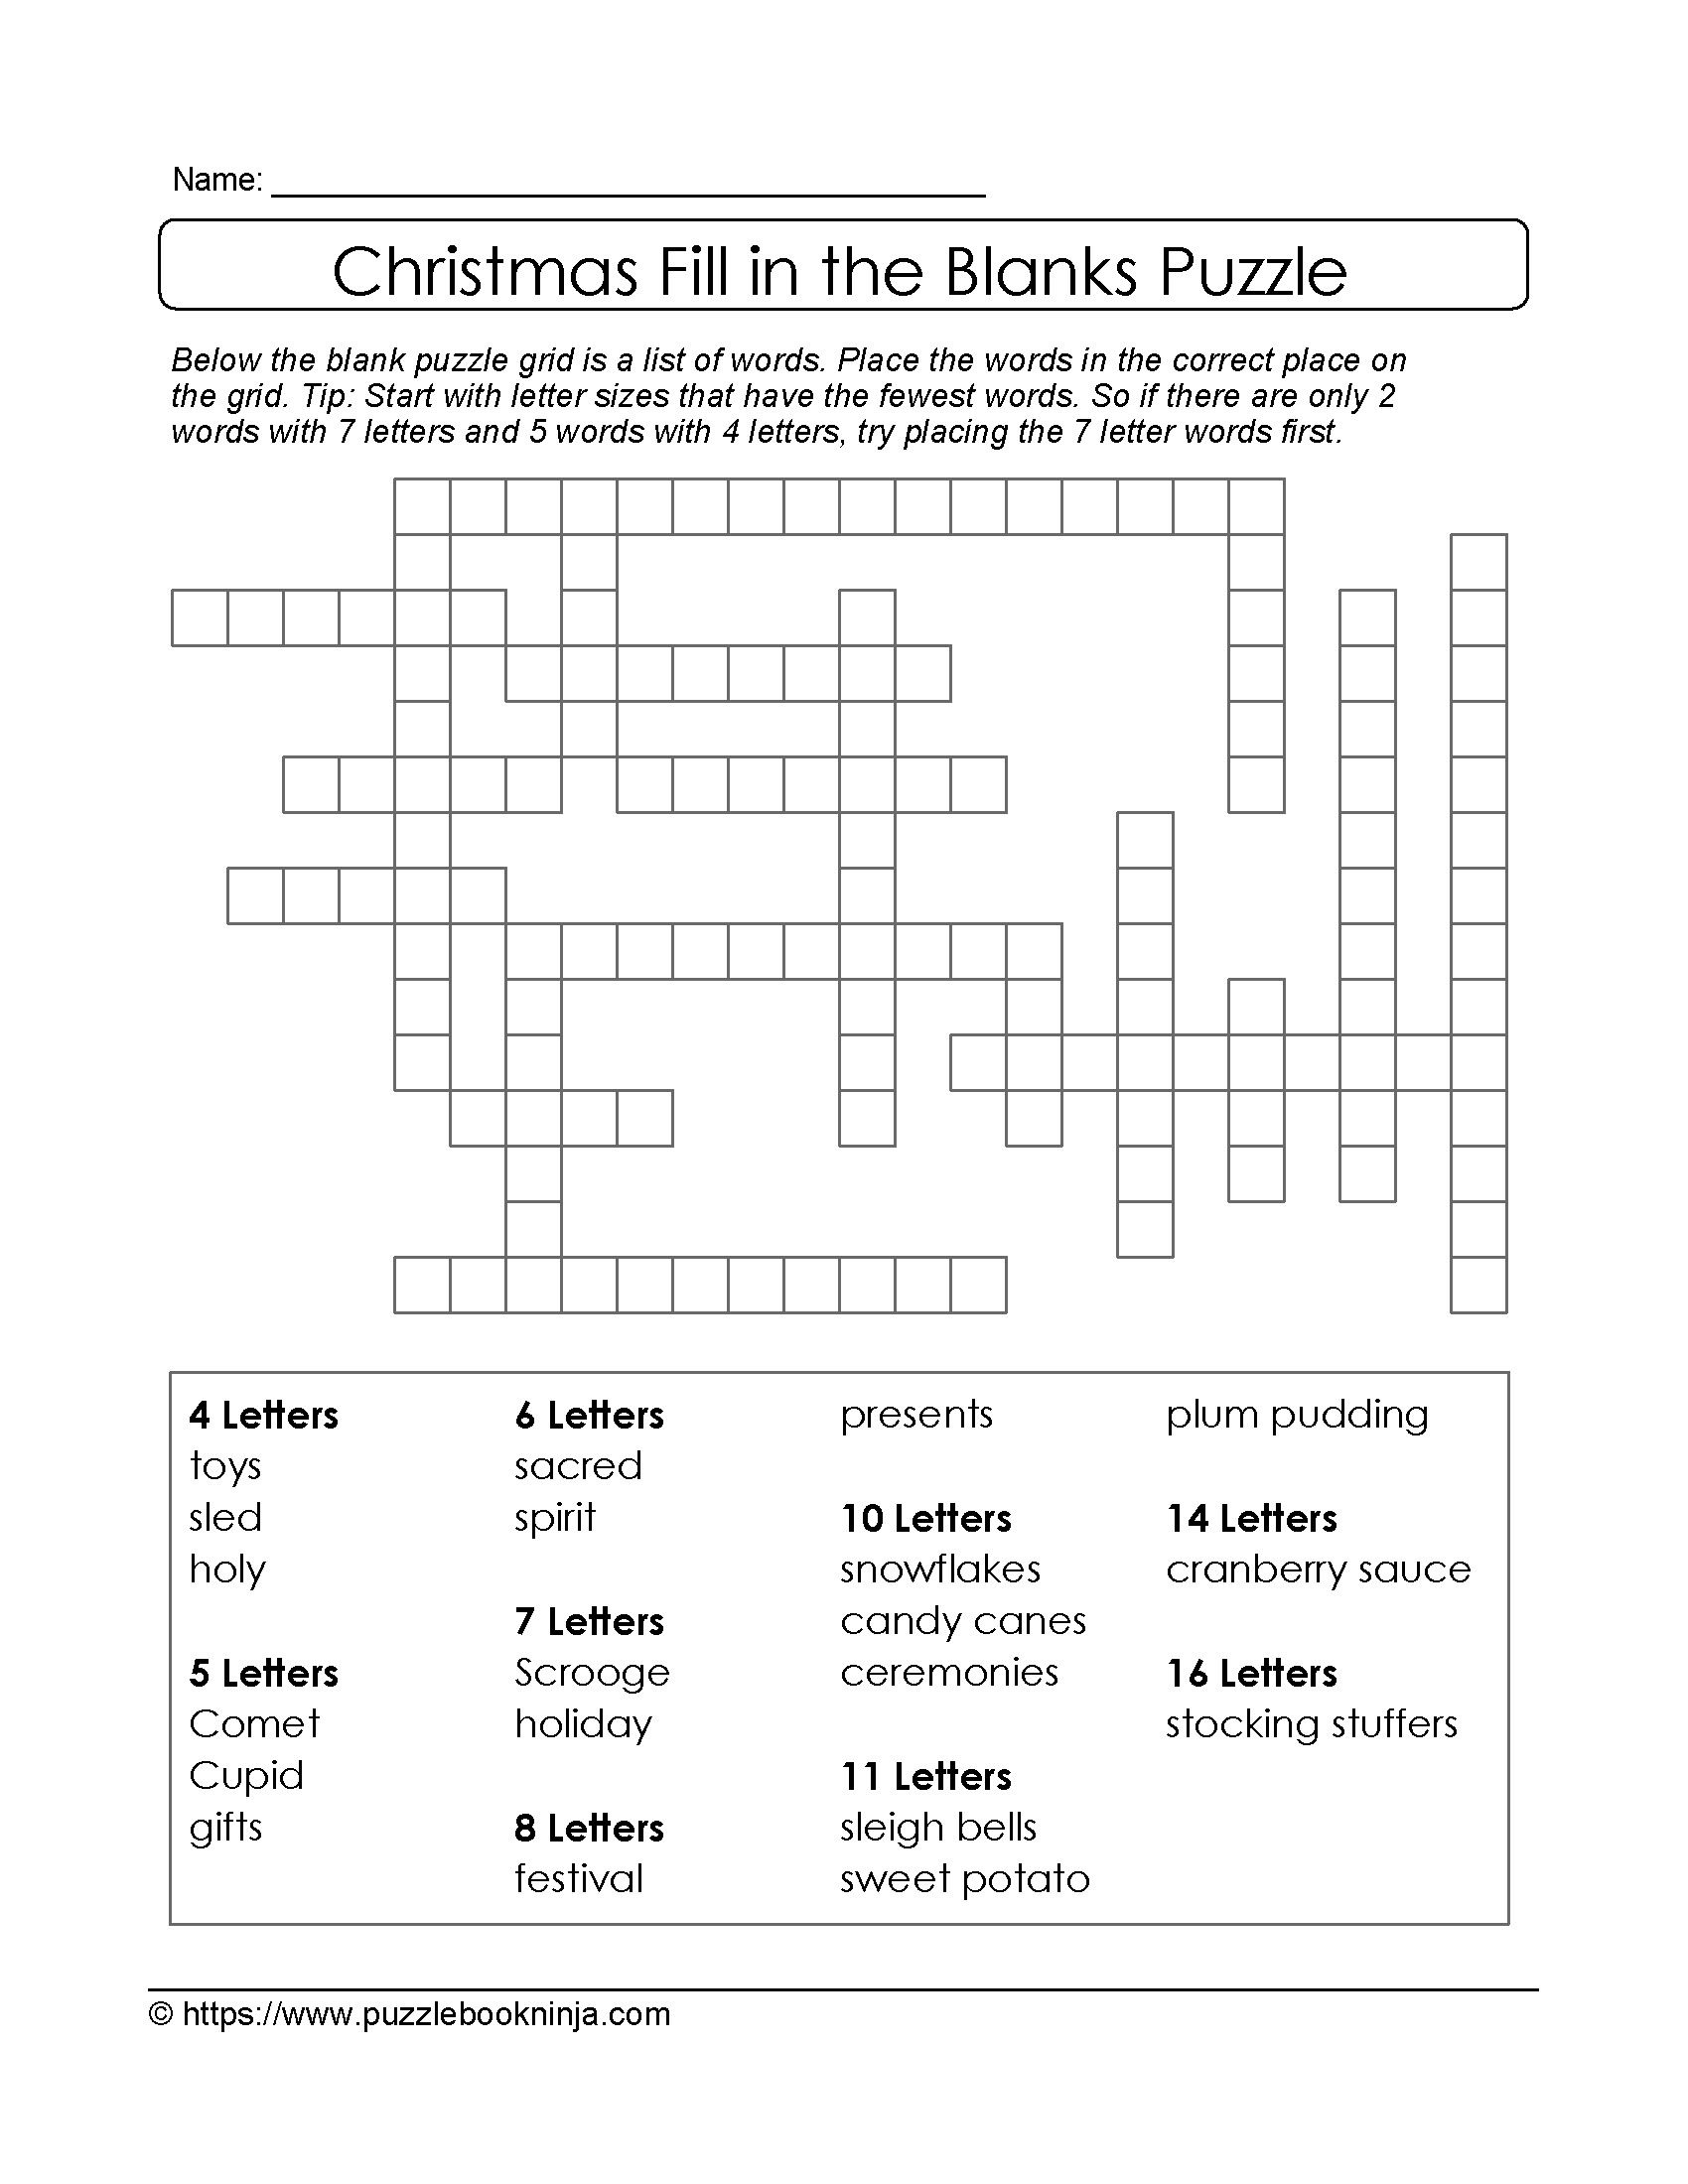 Puzzles To Print. Free Xmas Theme Fill In The Blanks Puzzle - Printable Holiday Crossword Puzzles For Adults With Answers